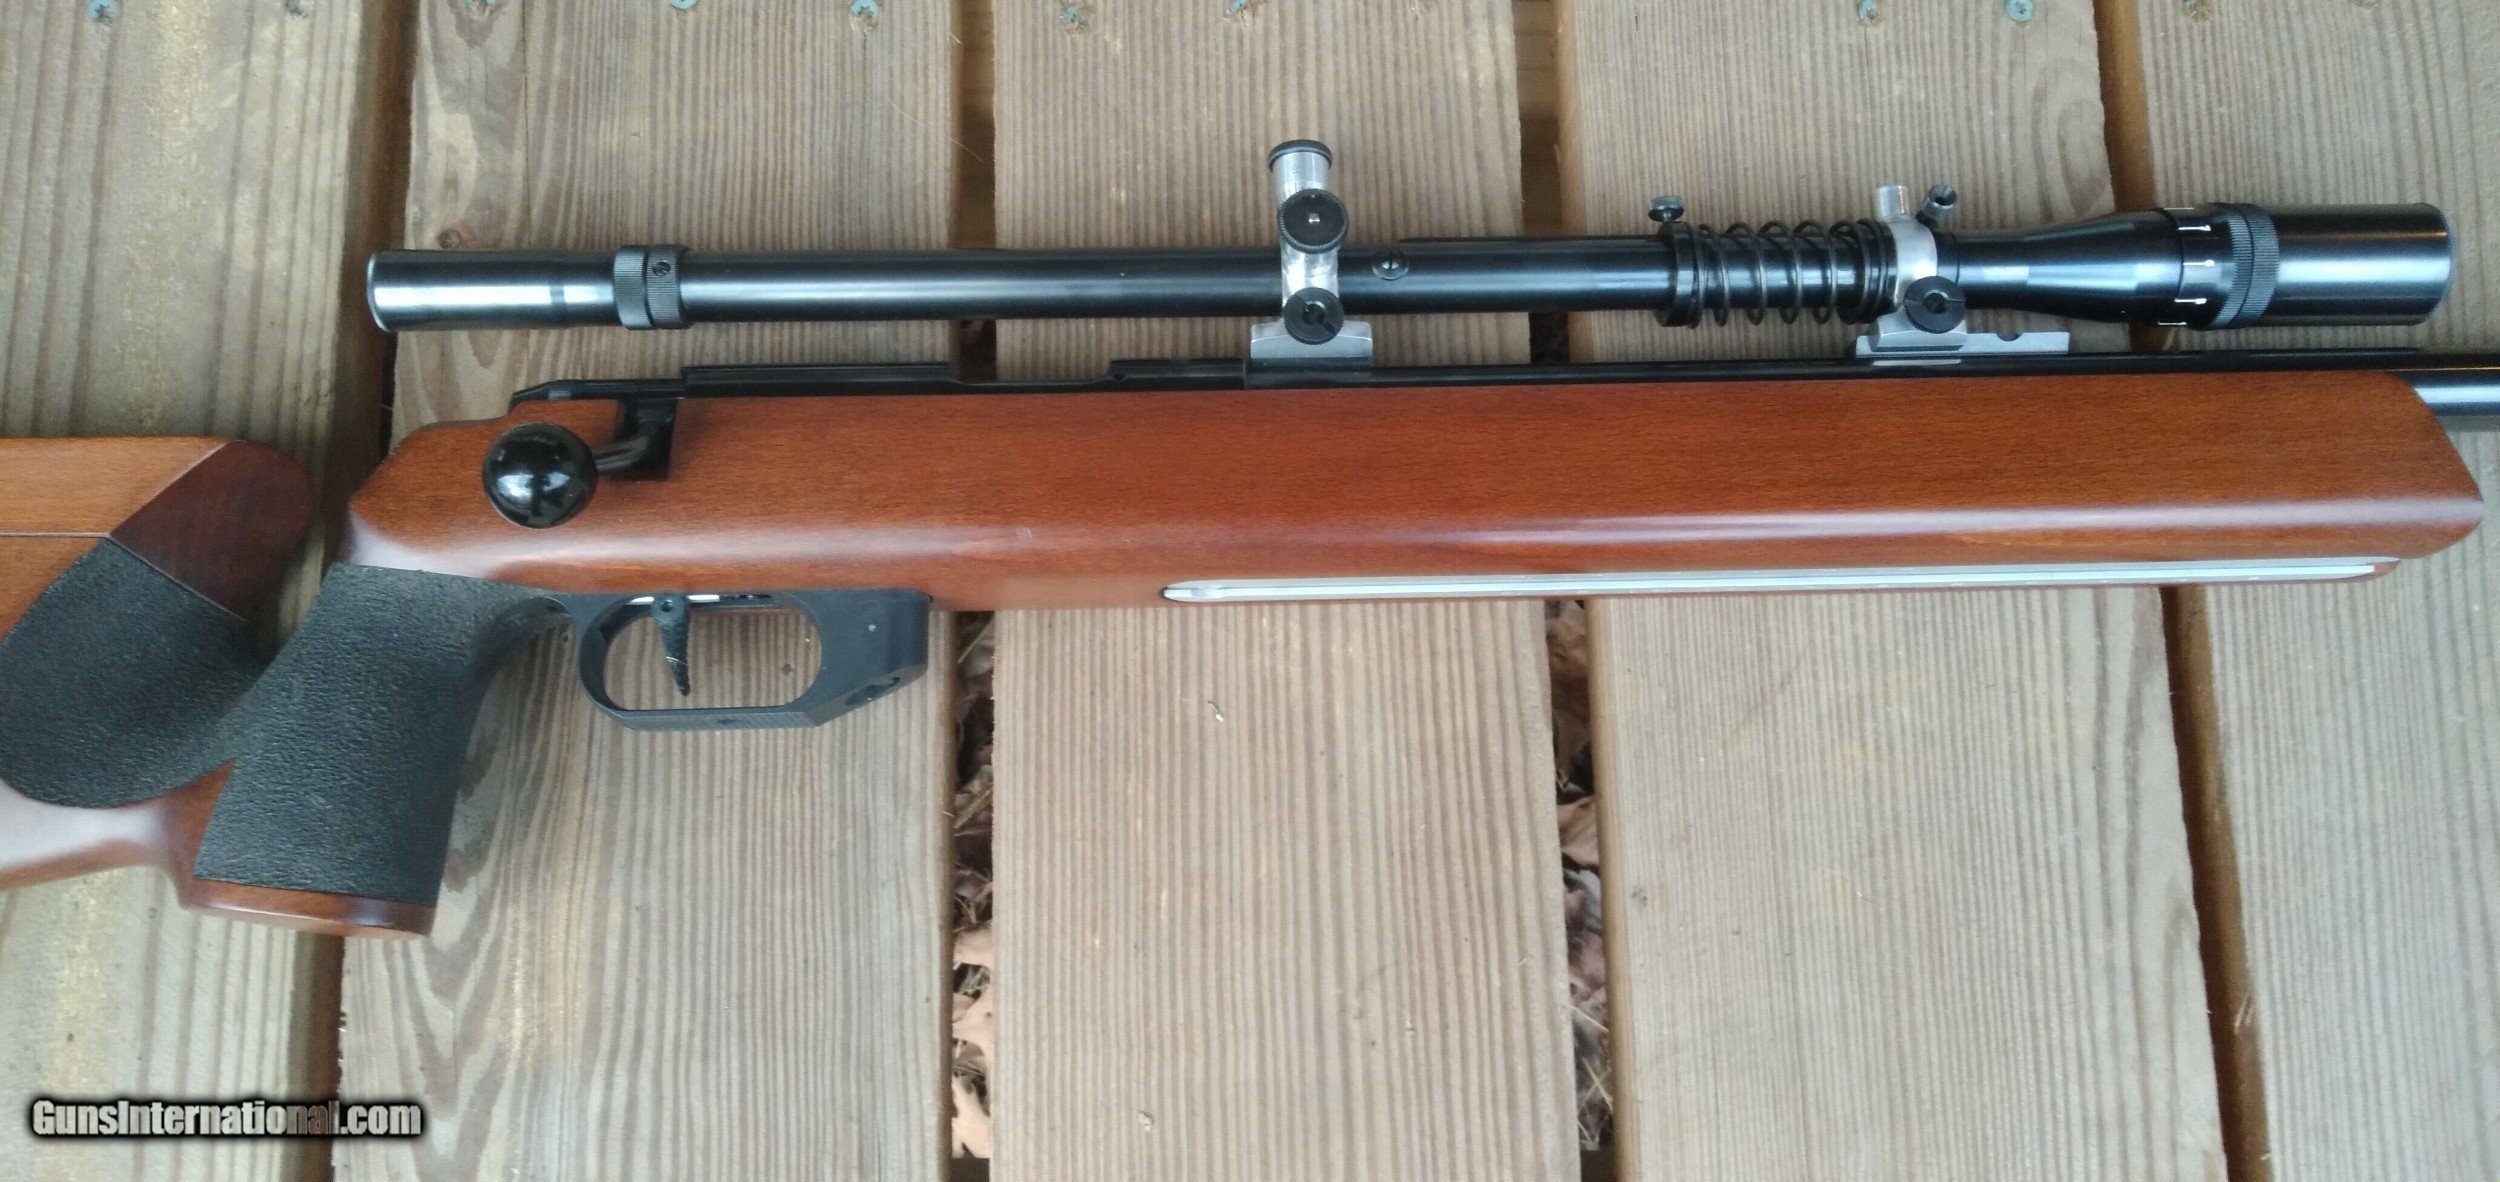 Anschutz Super Match 1913 22 Cal Target Rifle With Prone Stock And 8x